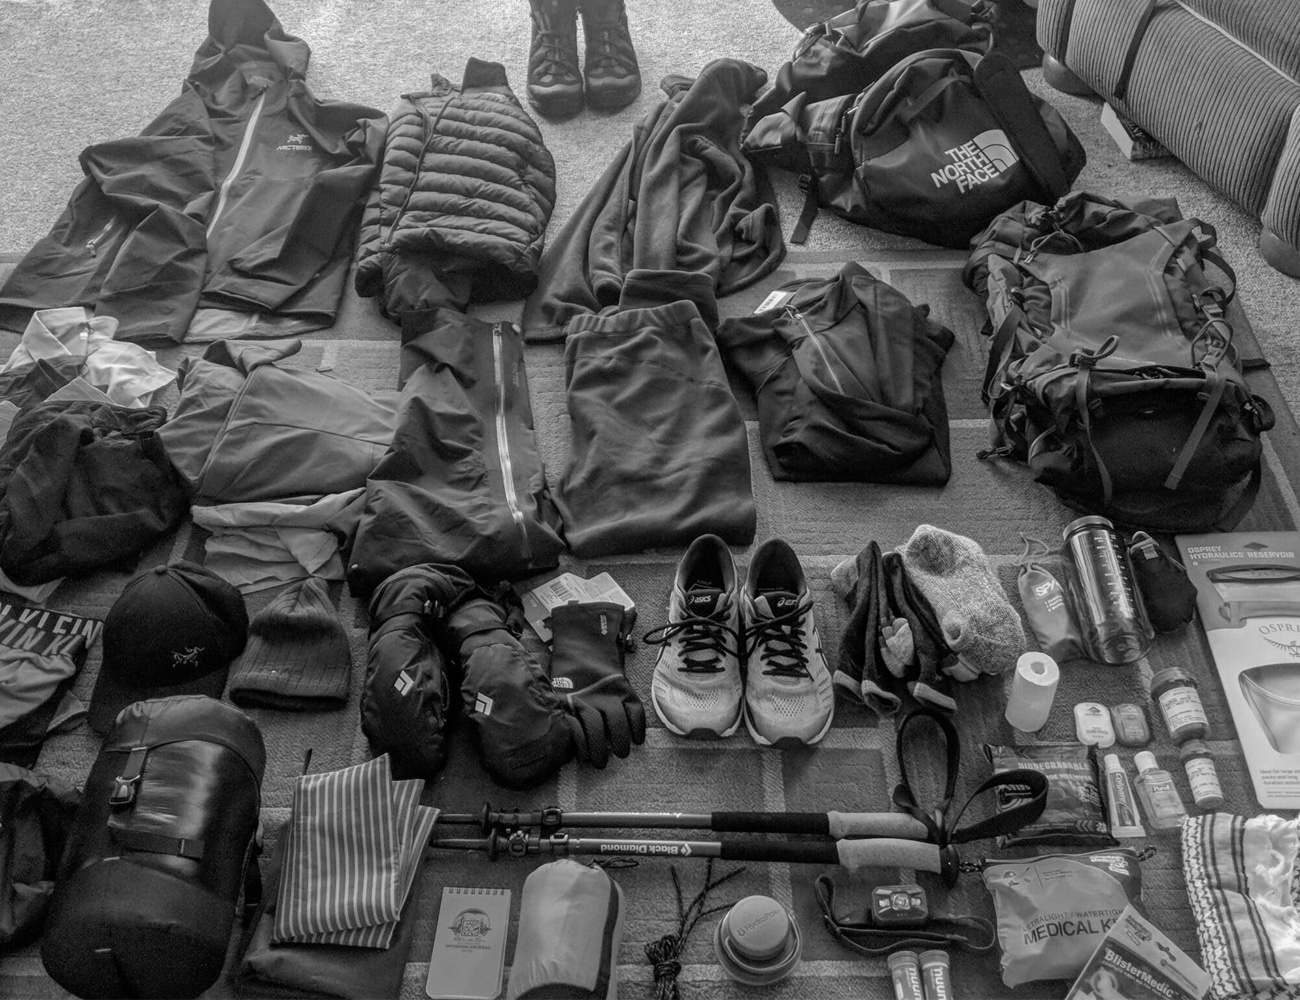 Equipements and Gears for Climbing Mount Kilimanjaro